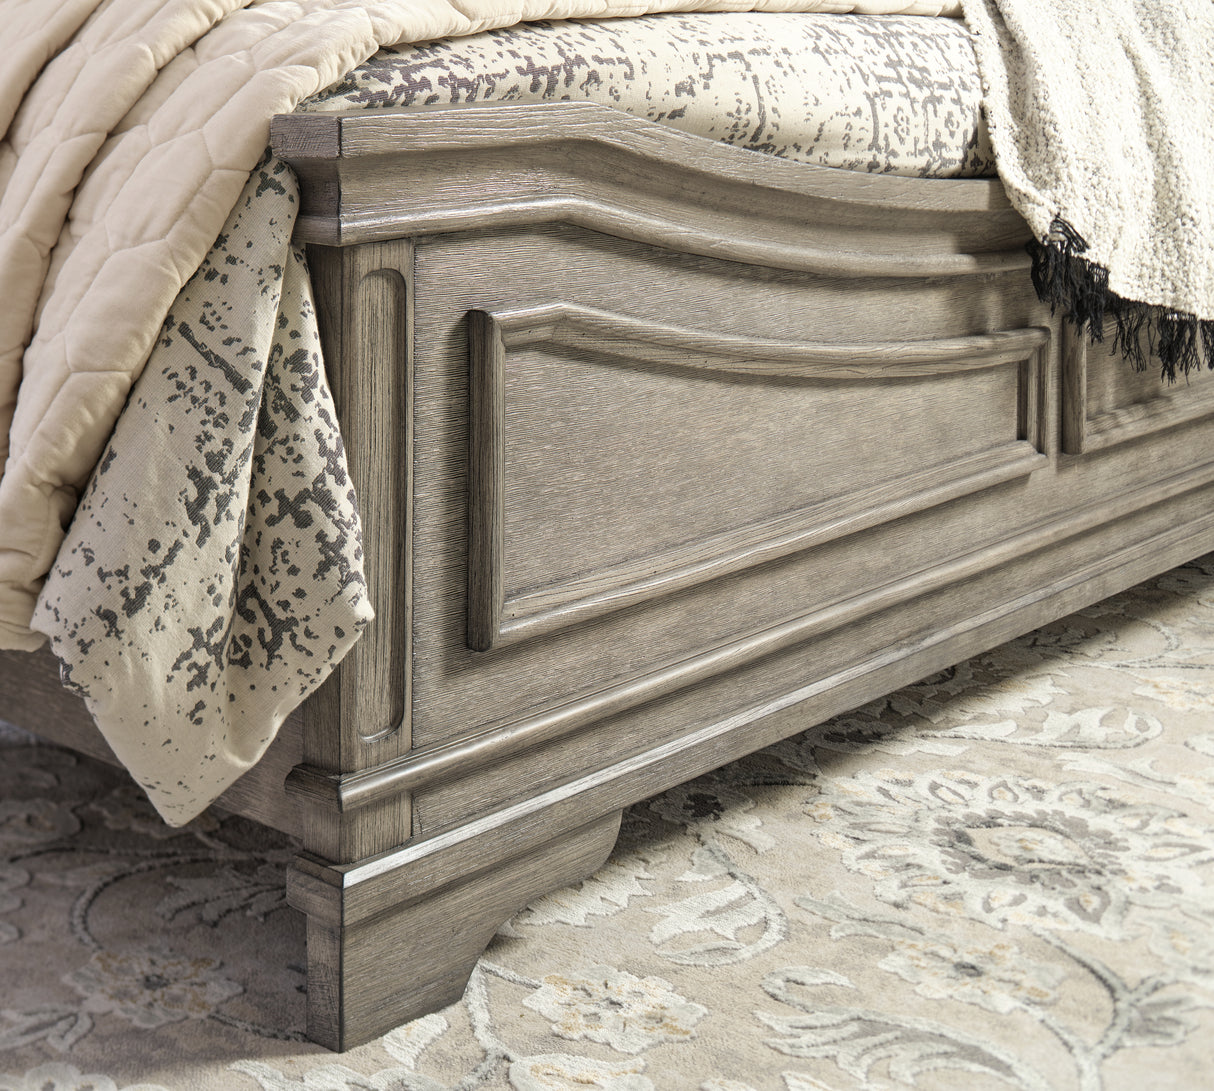 Lodenbay Antique Gray California King Panel Bed